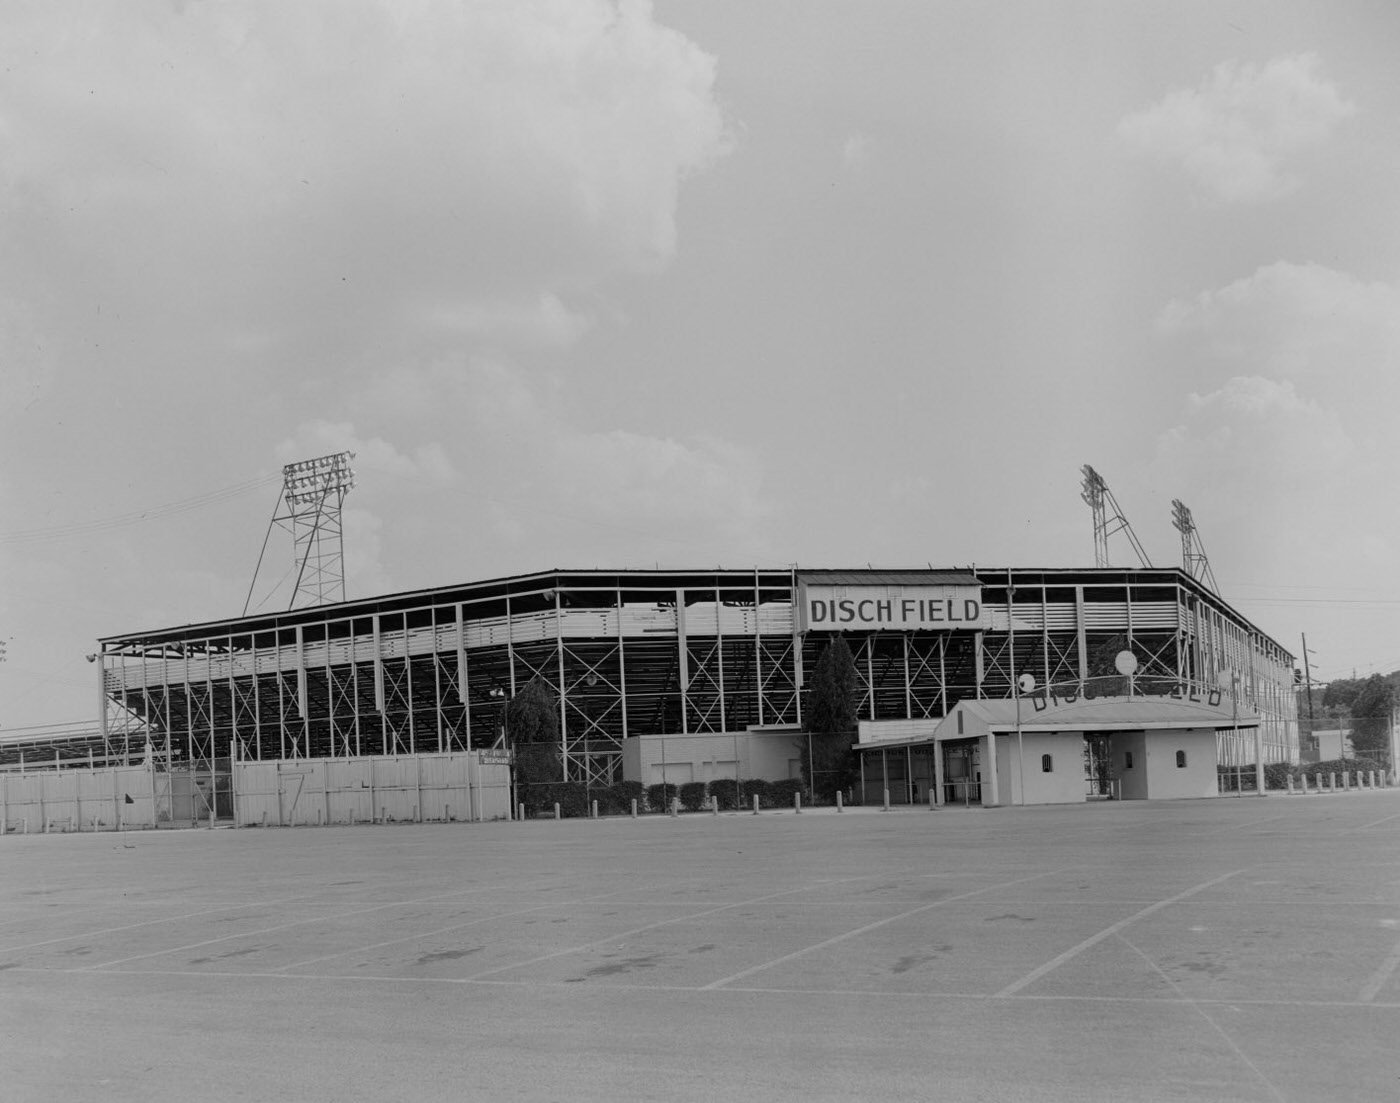 Exterior of Disch Field and Parking Lot, 1959